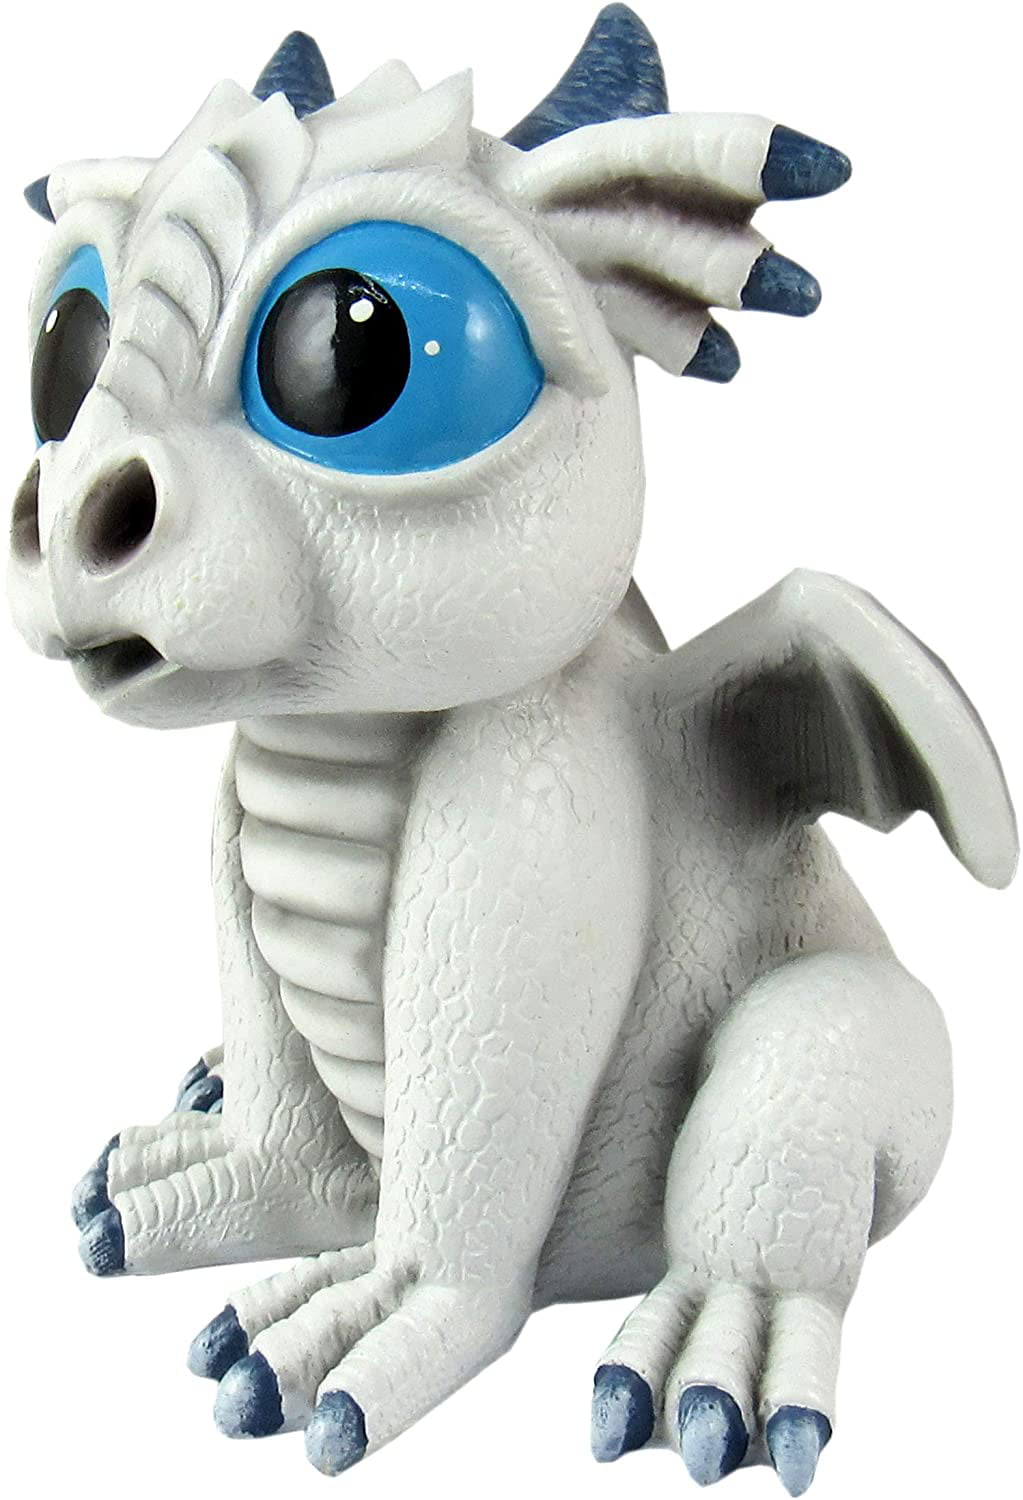 World of Wonders Crystal Dragon Figurine Official Birth Certificate Accent  White 